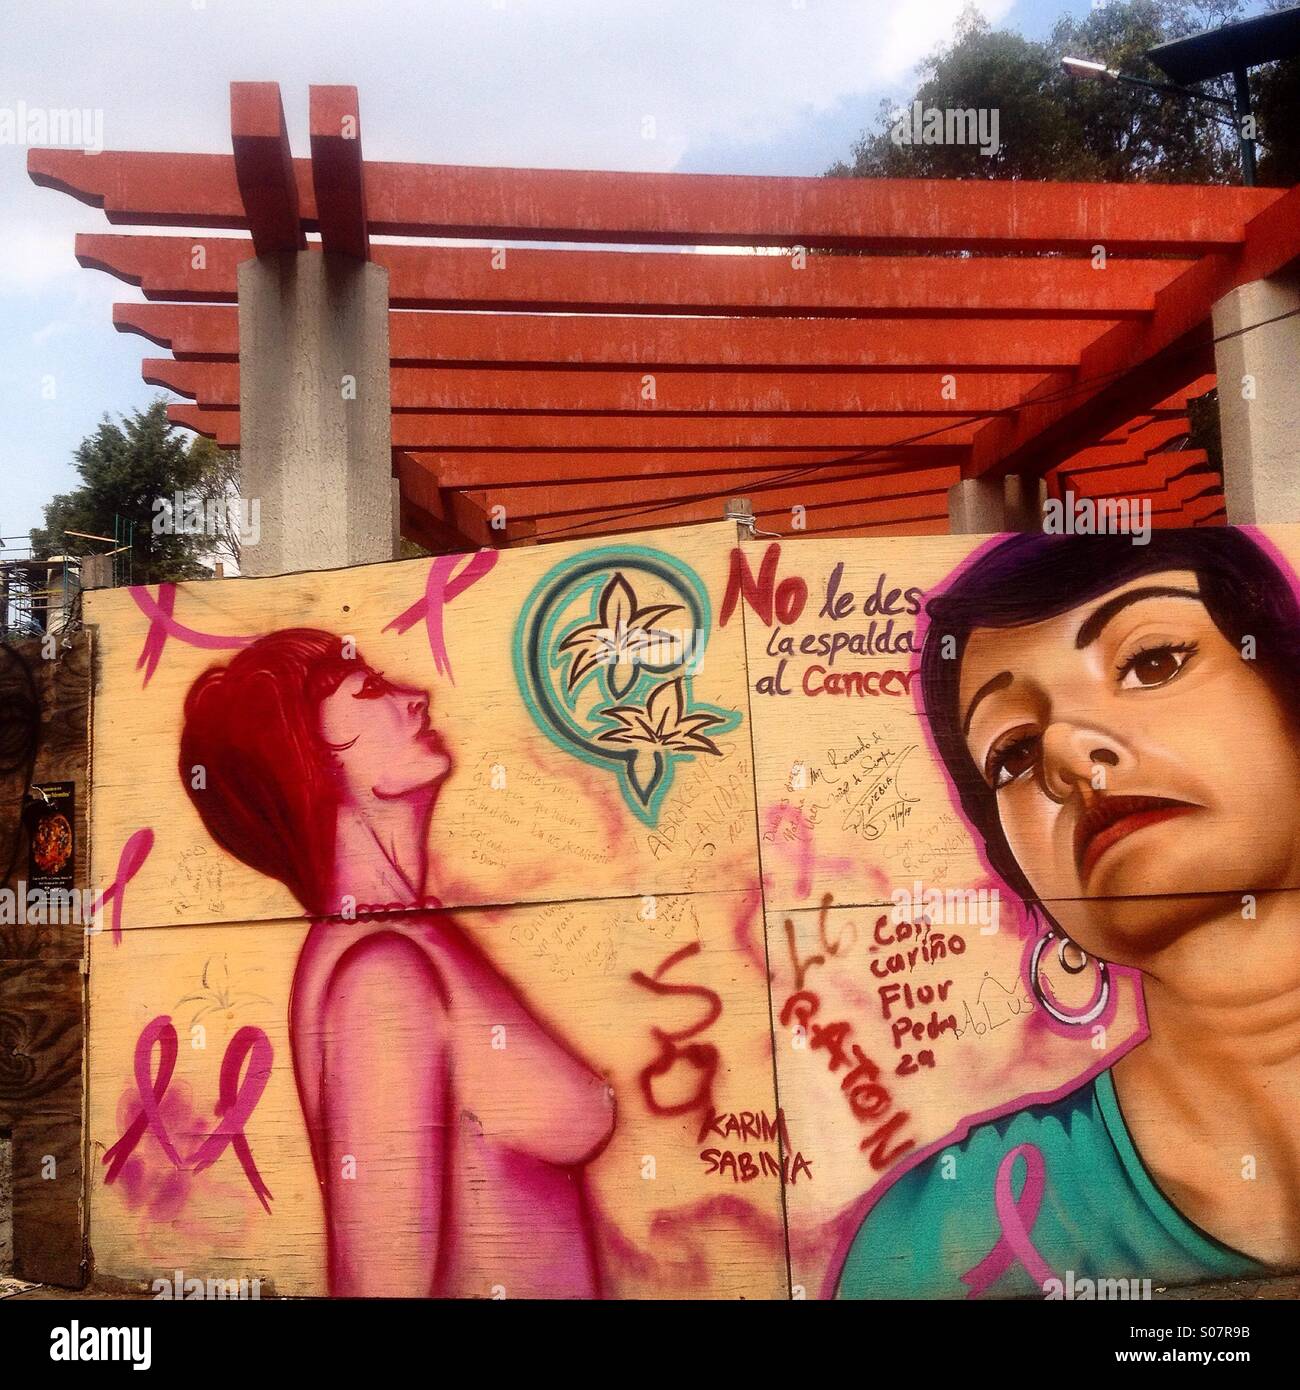 Street art in solidarity with women suffering cance decorates a wooden wall in Parque Mexico, Mexico City, Mexico Stock Photo